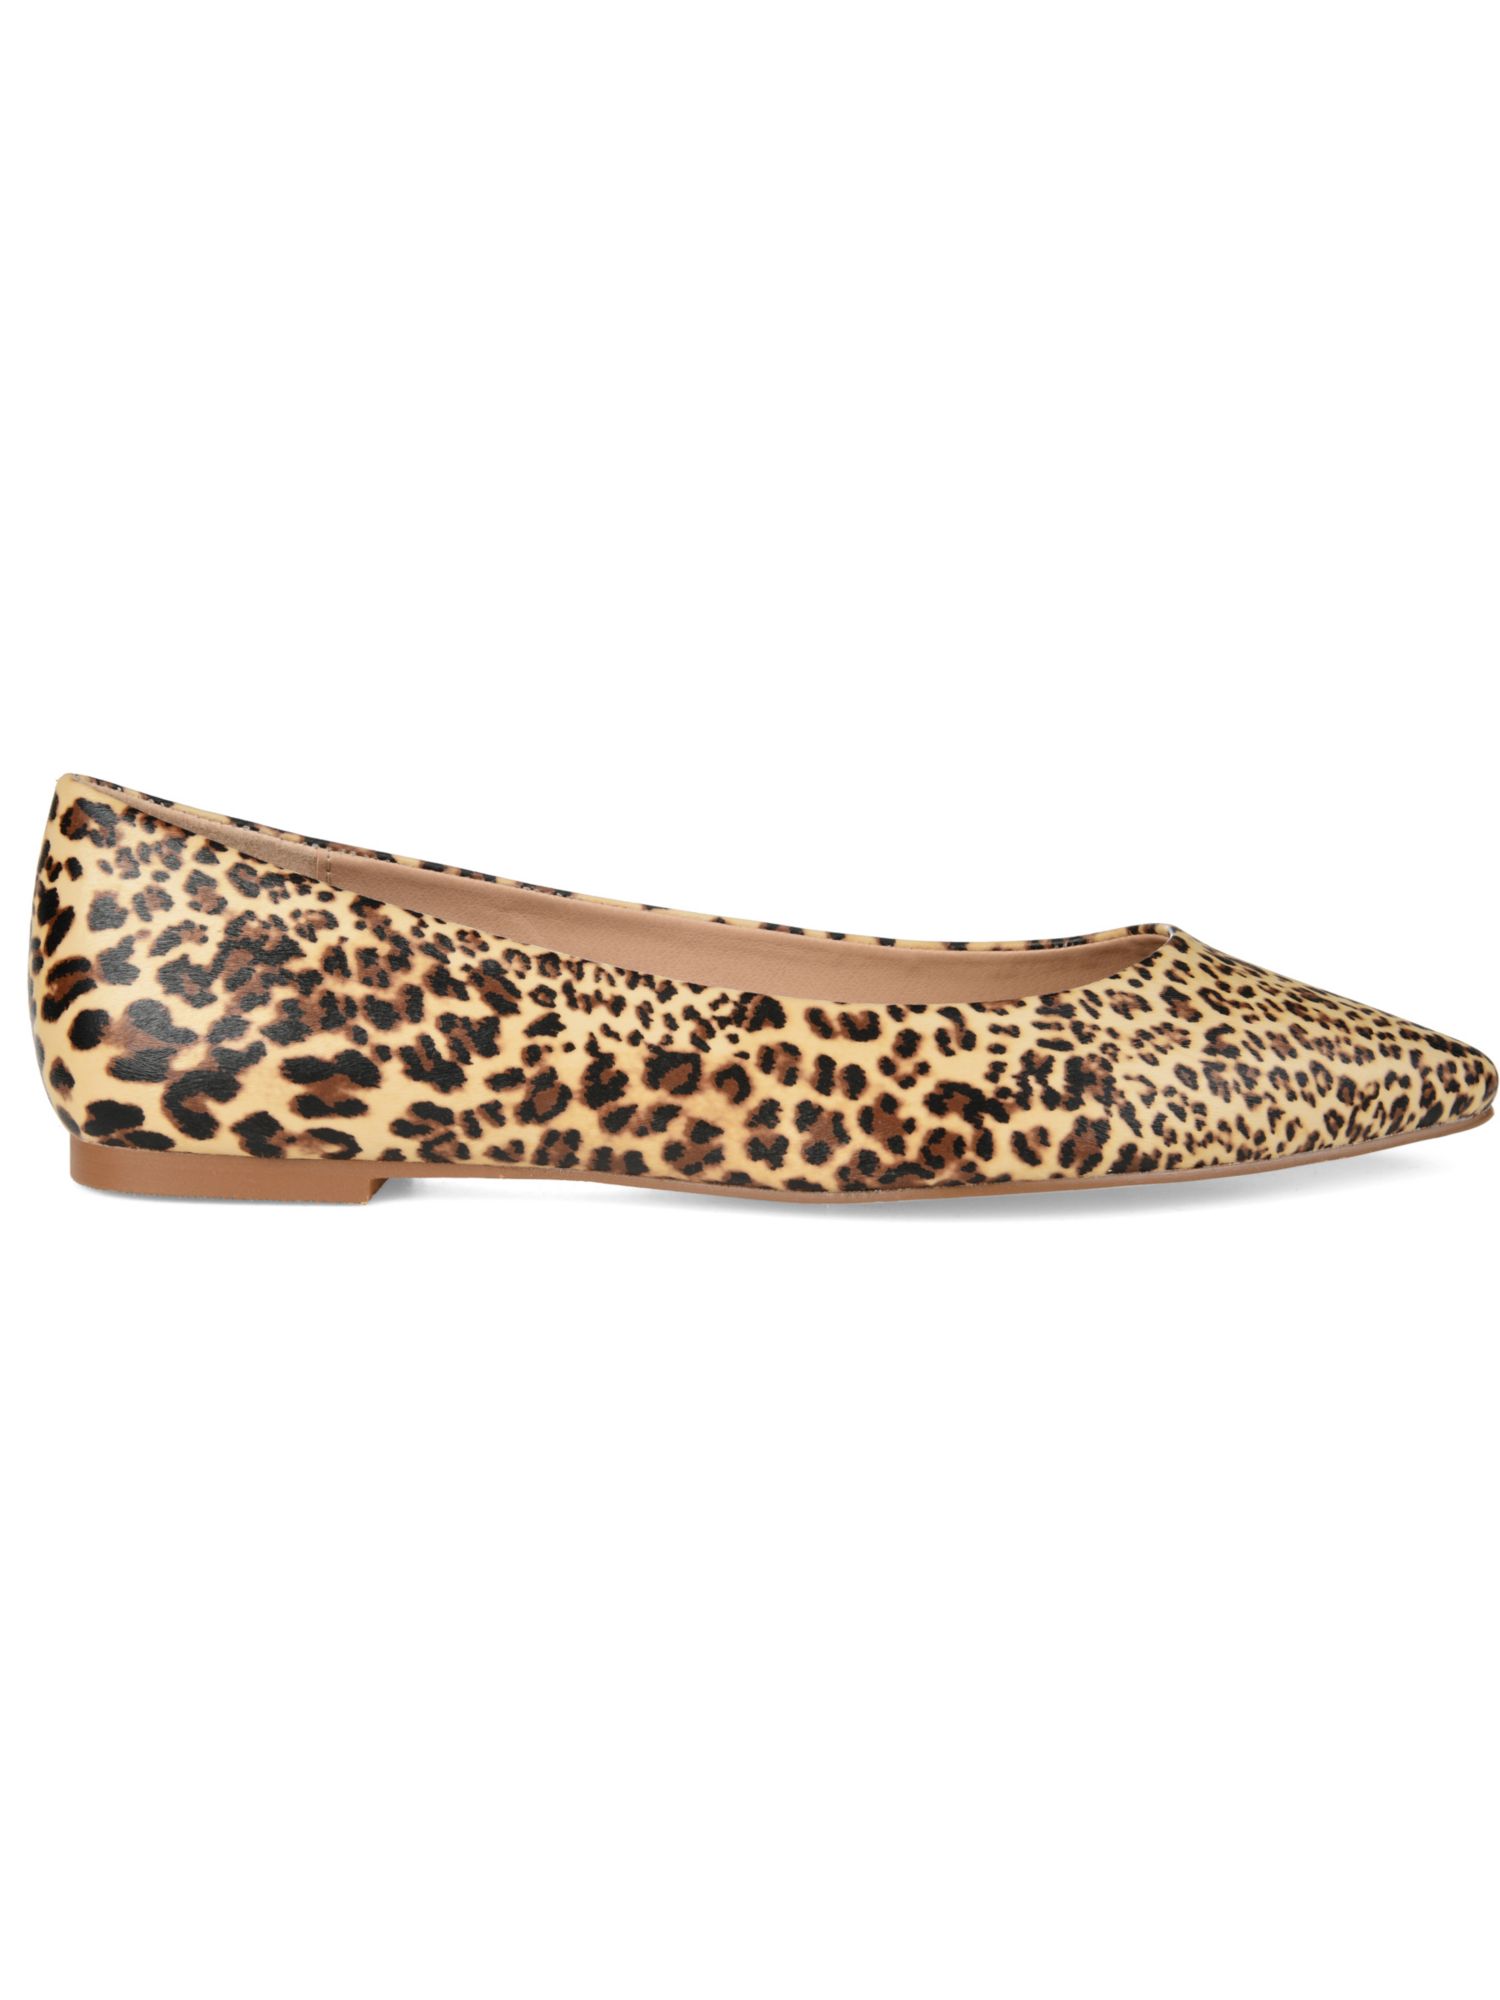 JOURNEE COLLECTION Womens Brown Leopard Print Comfort Moana Pointed Toe Slip On Ballet Flats 6.5 M